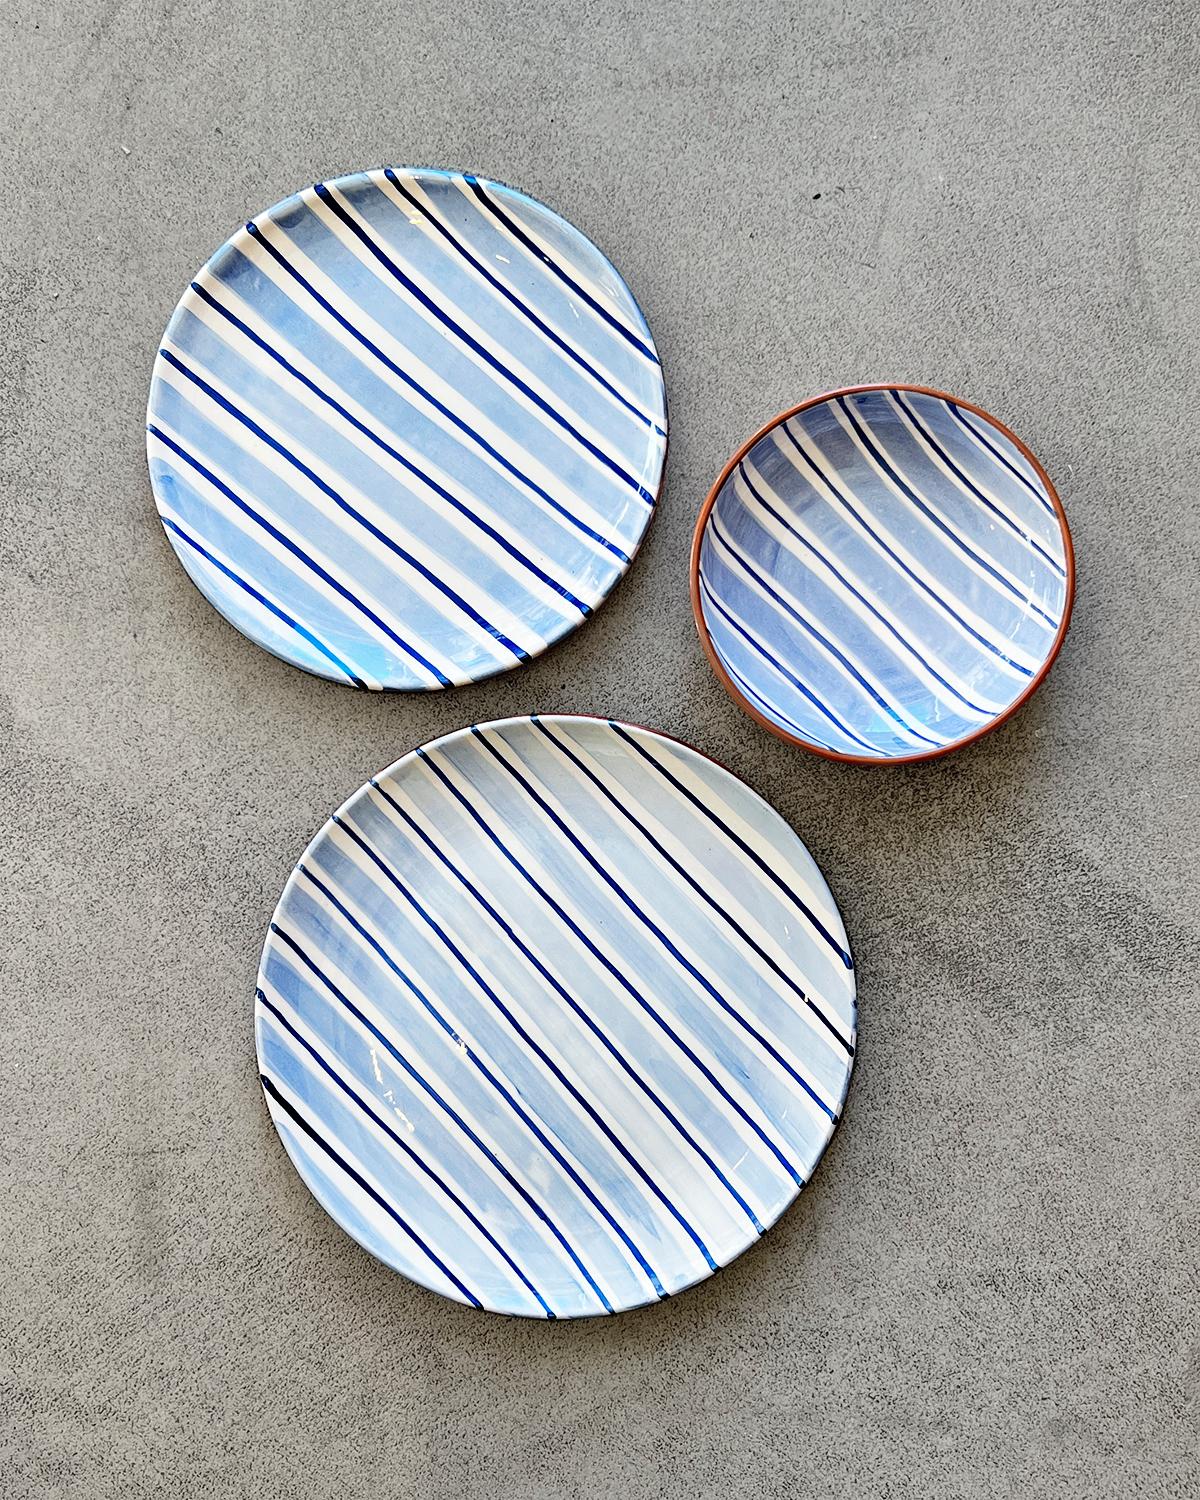 Casa Cubista Cabana Blue Striped Terracotta Dinnerware Bowls In New Condition For Sale In West Hollywood, CA